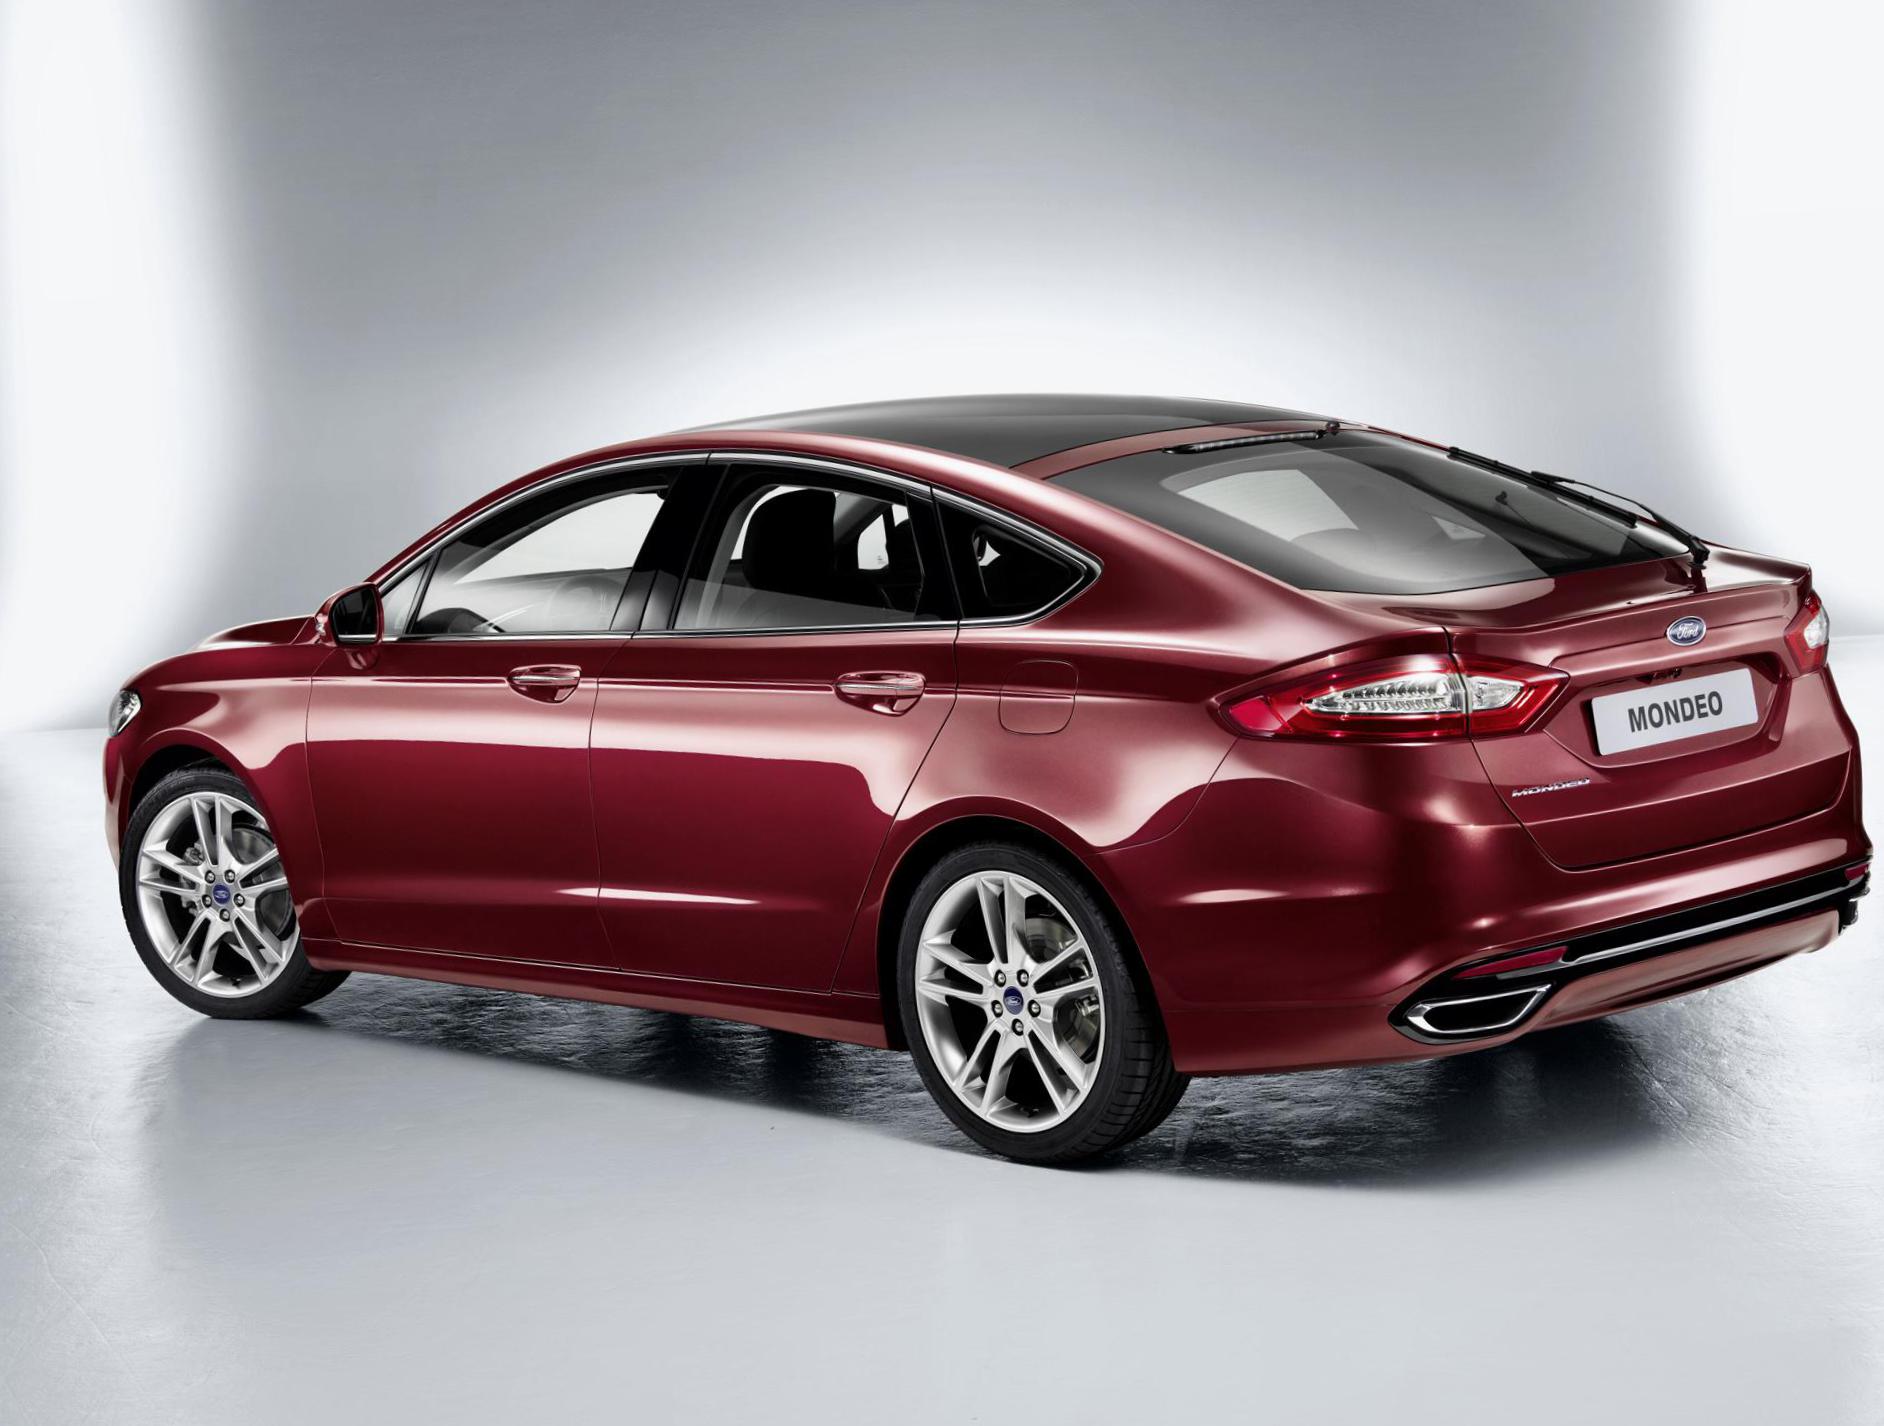 Mondeo Hatchback Ford configuration wagon